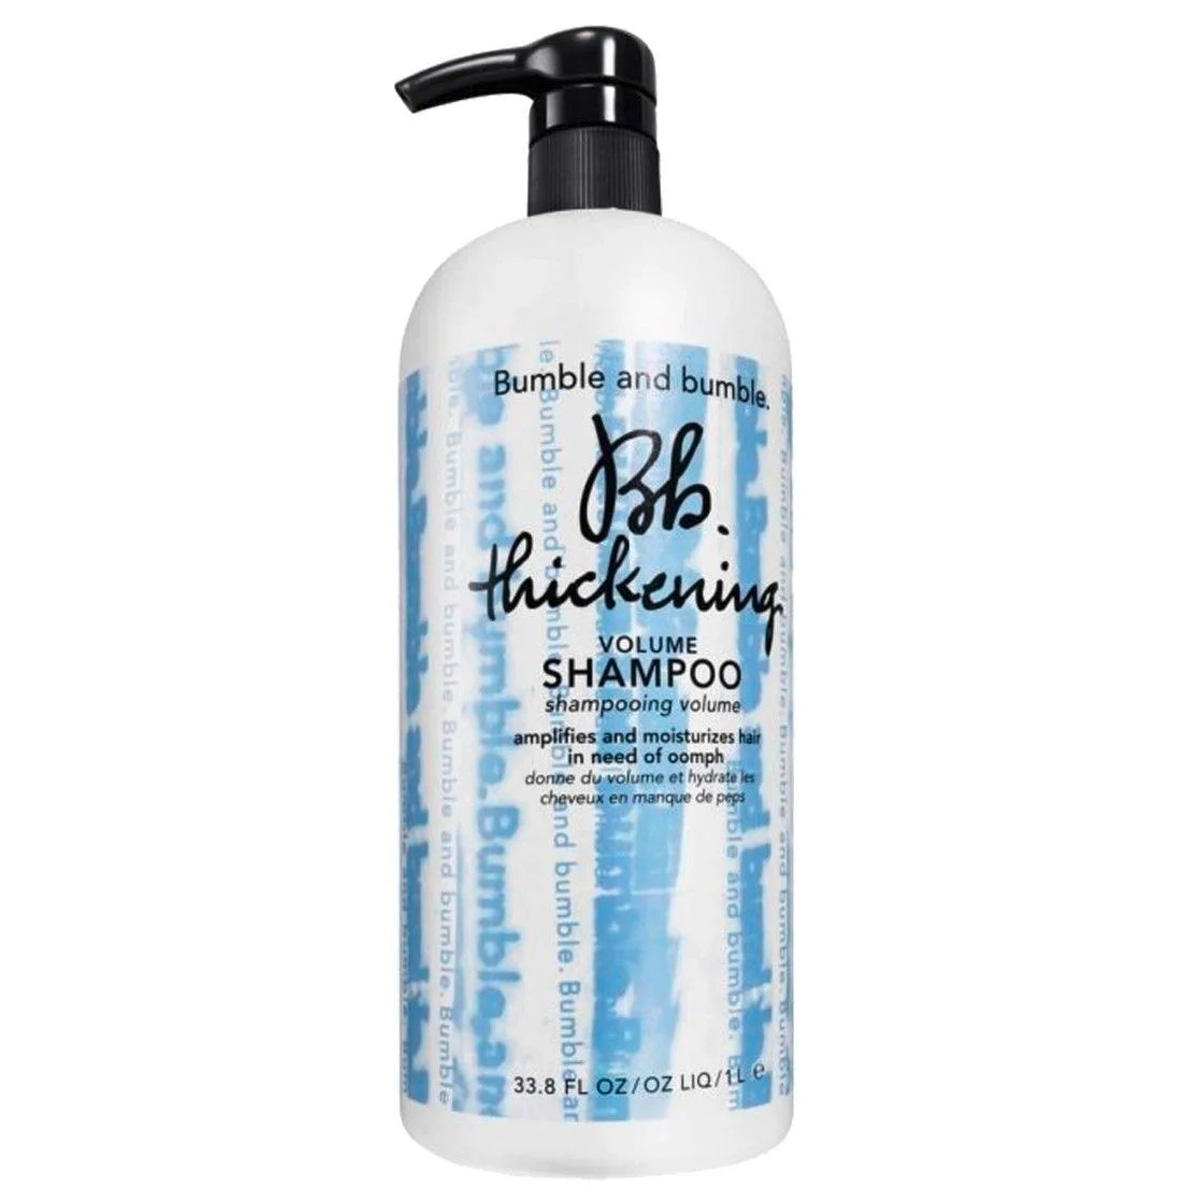 Bumble and bumble Thickening Shampoo 1 litro - 1